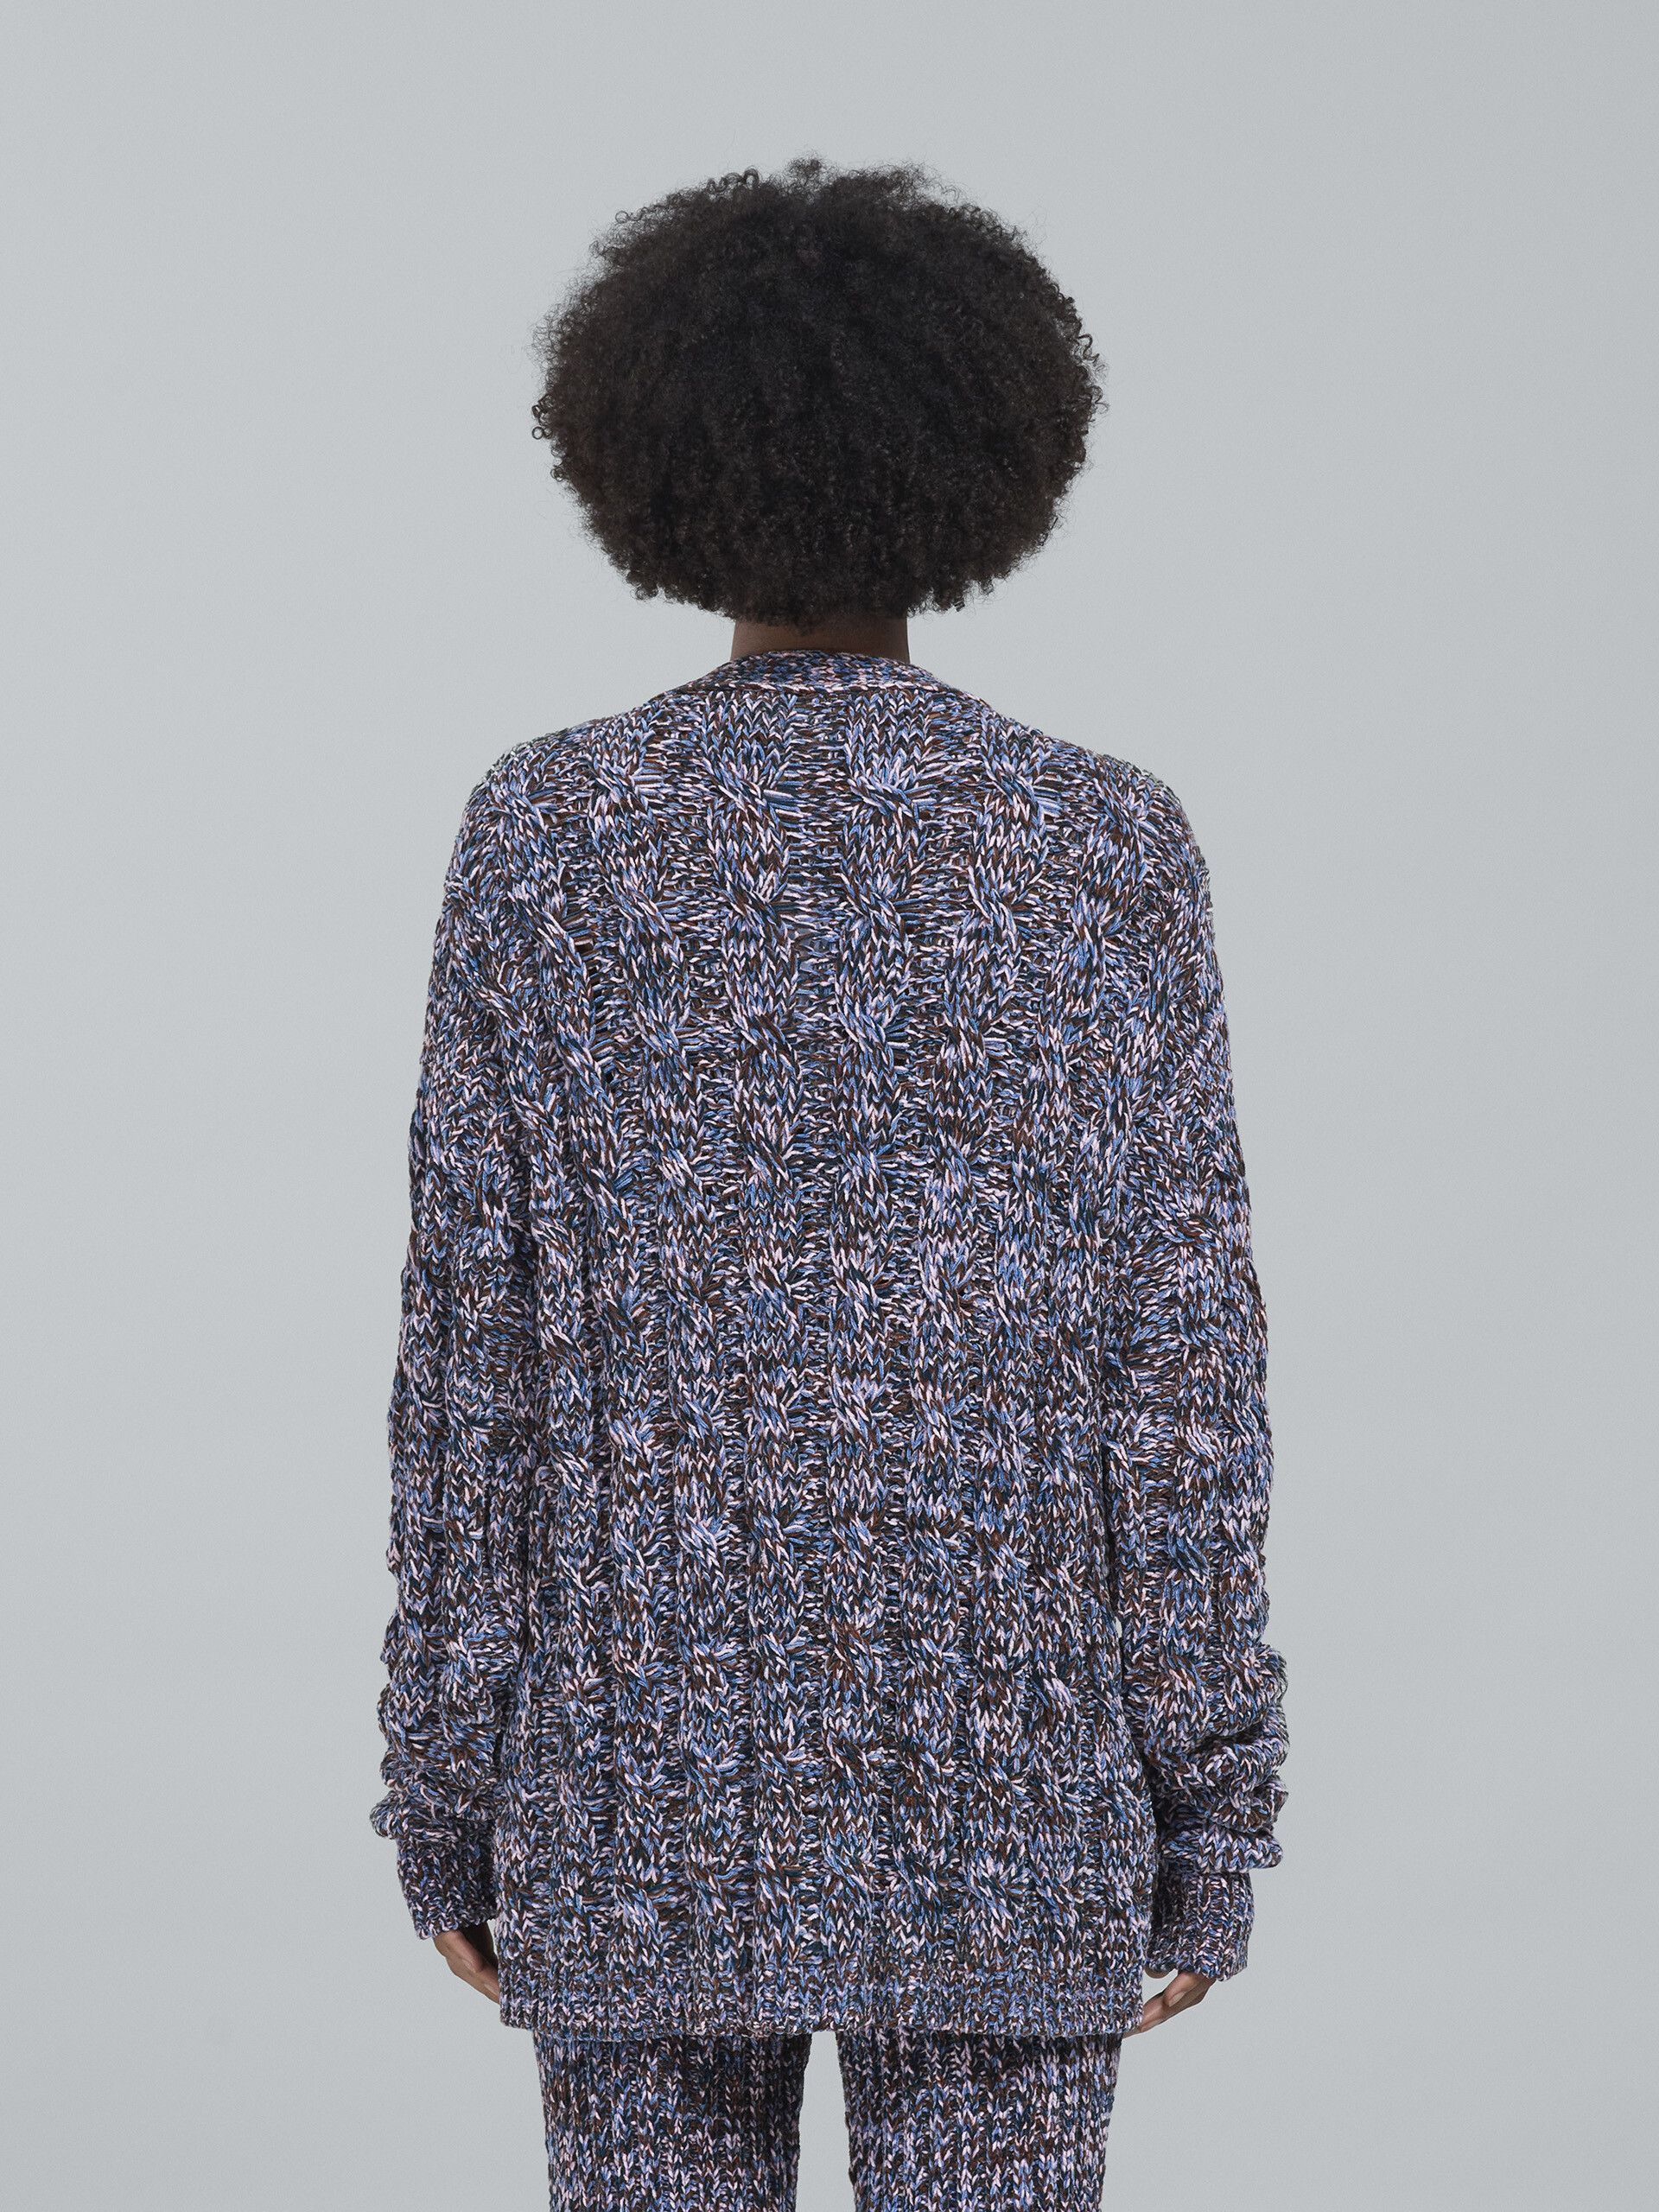 Viscose and cotton chenille cardigan - Pullovers - Image 3